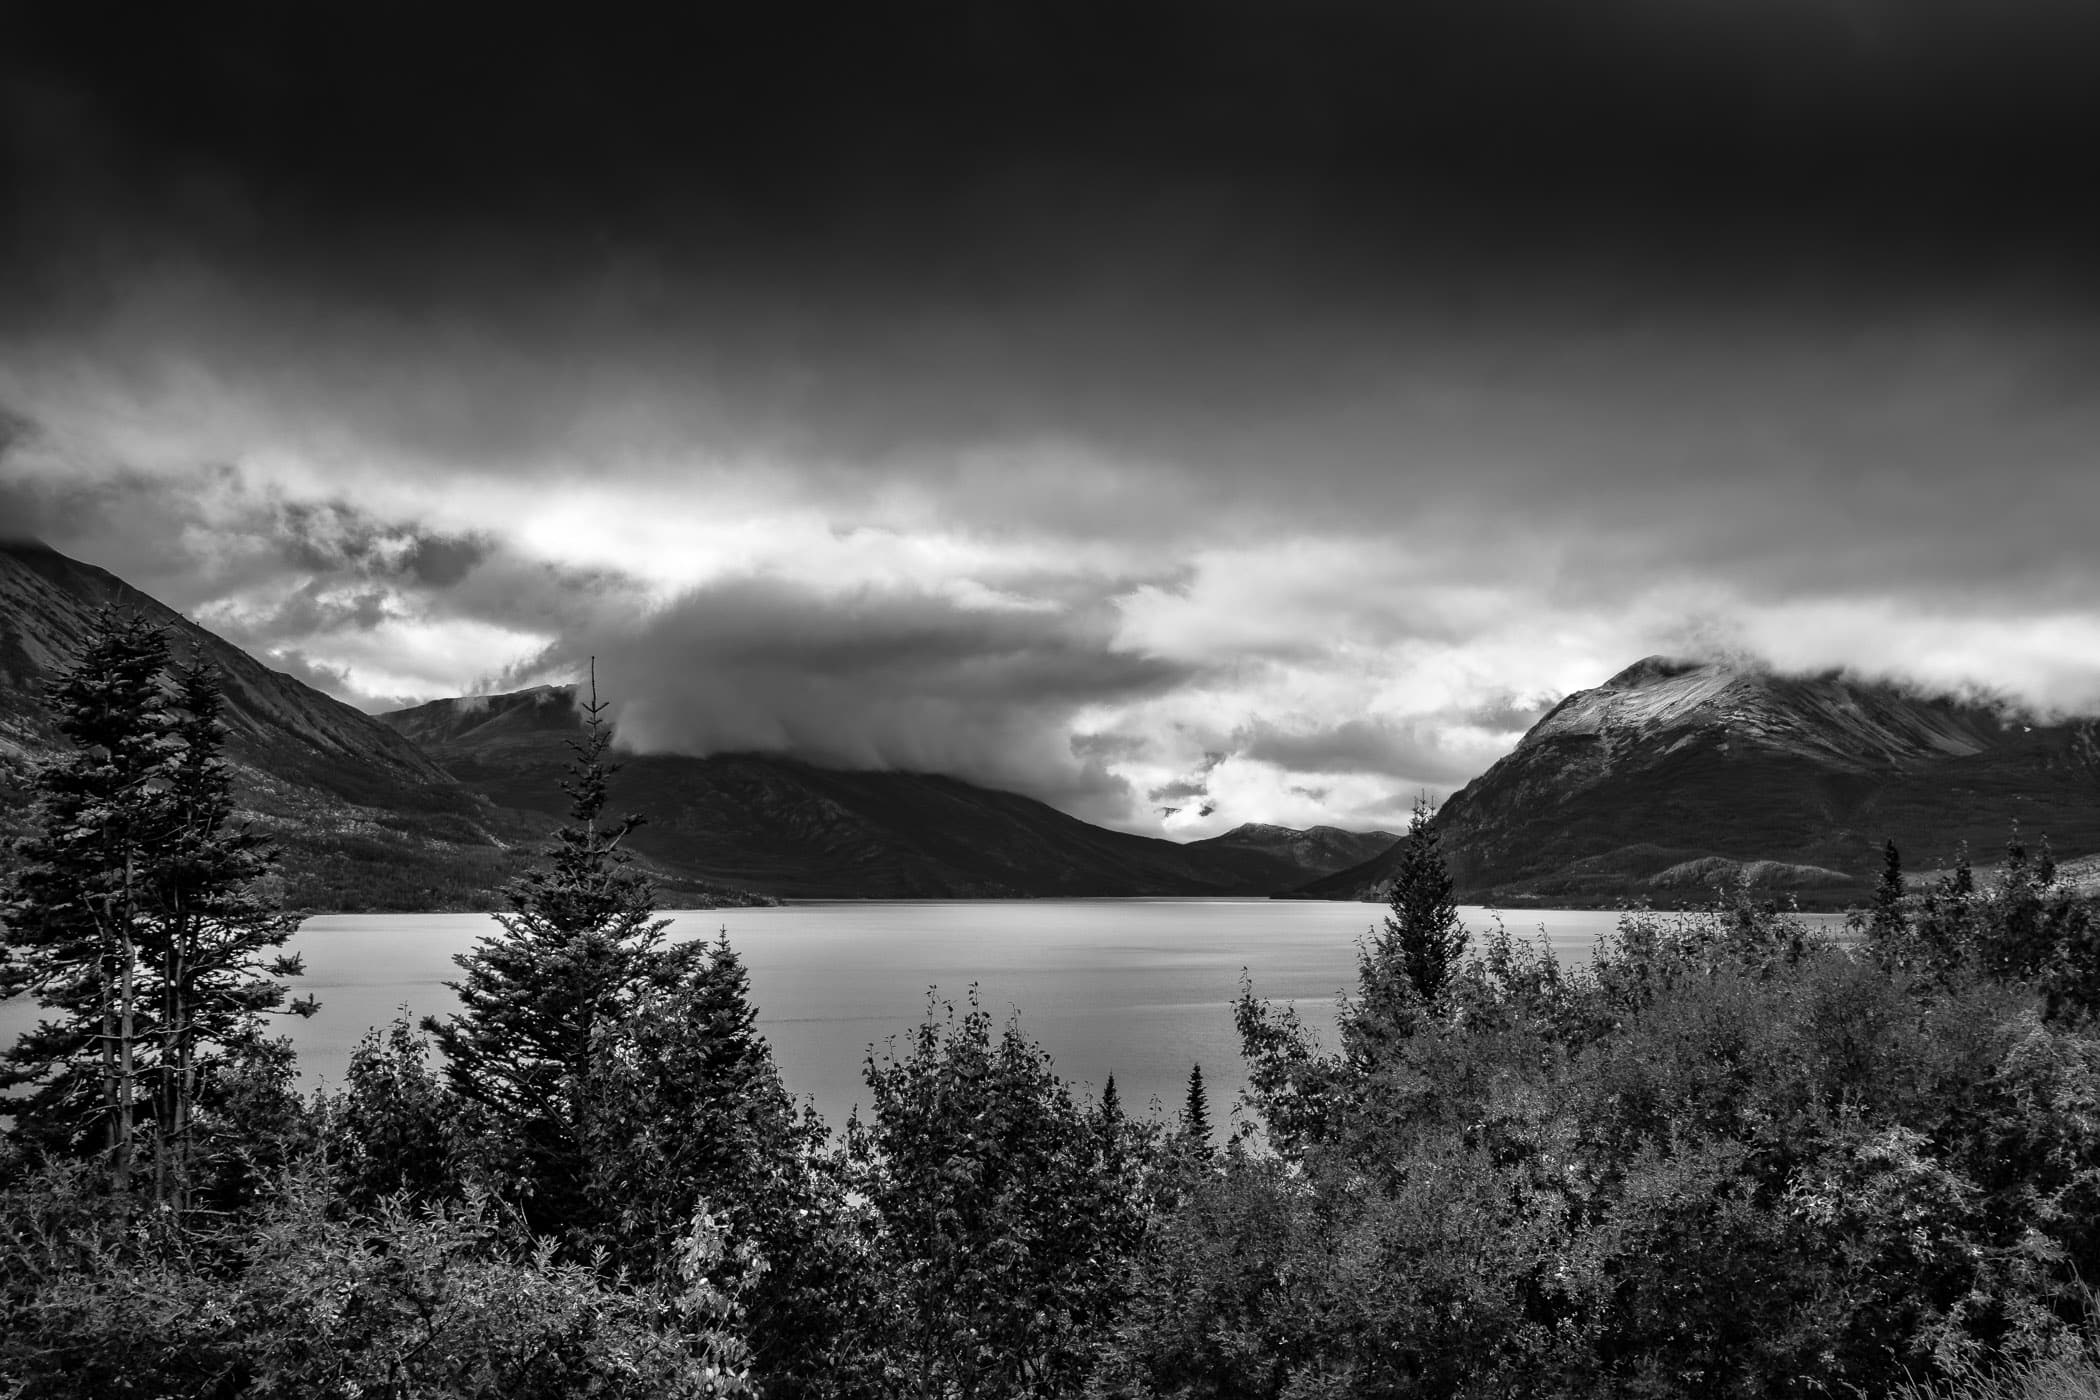 Clouds roll over the mountainous shore of British Columbia's Tutshi Lake.